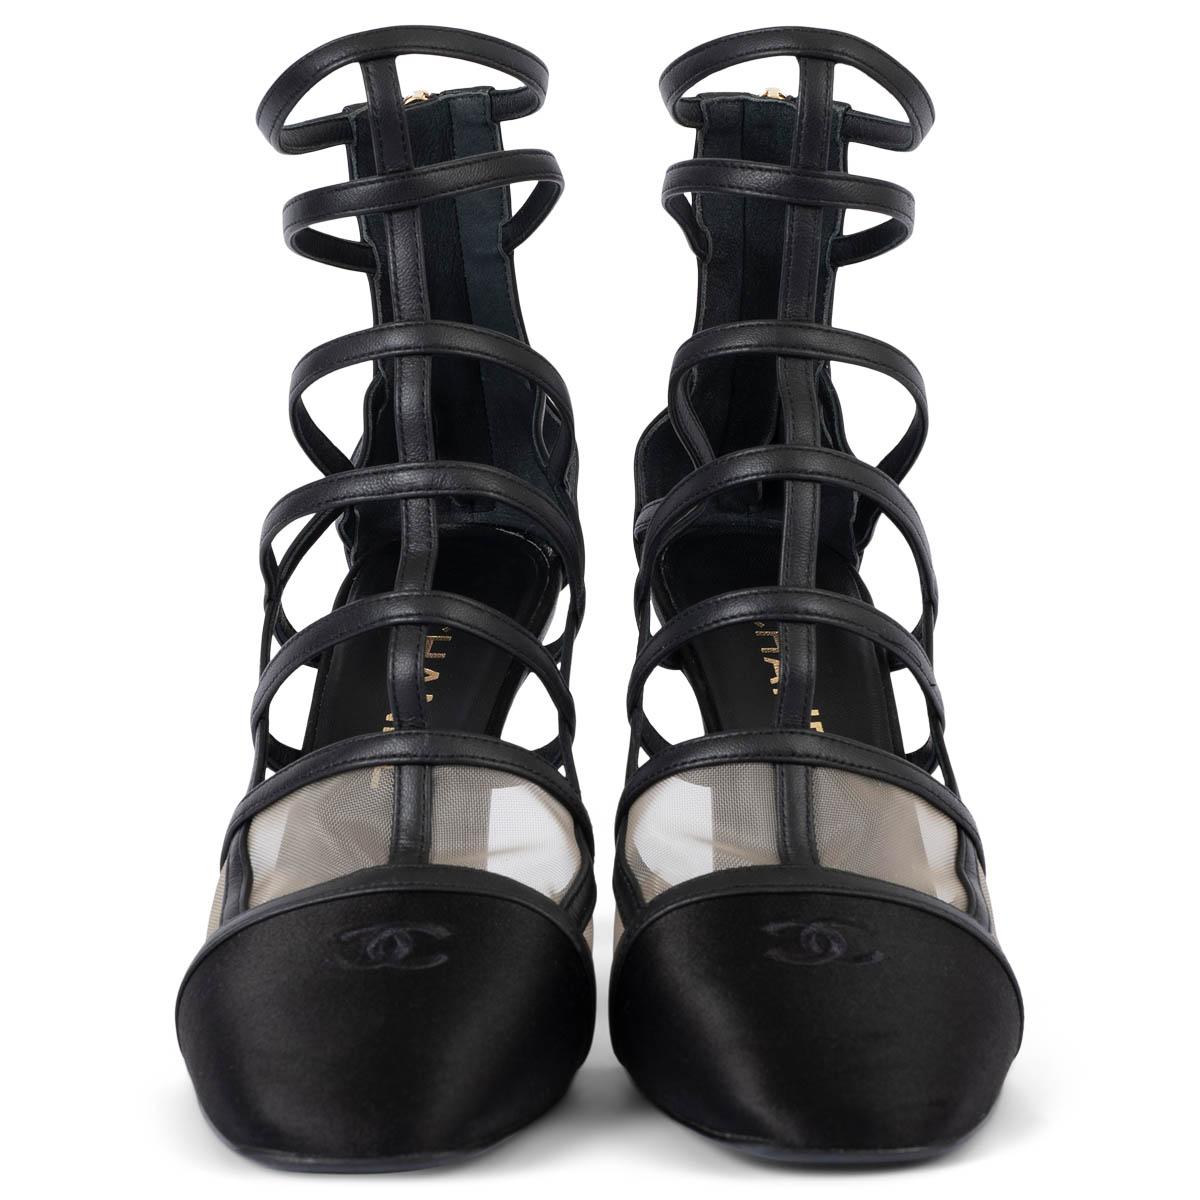 100% authentic Chanel caged cut-out ankle-boots in black leather featuring black CC satin cap toe and nude mesh inserts. Open with a zipper on the heel. Have been worn and are in excellent condition. 

Measurements
Imprinted Size	38
Shoe